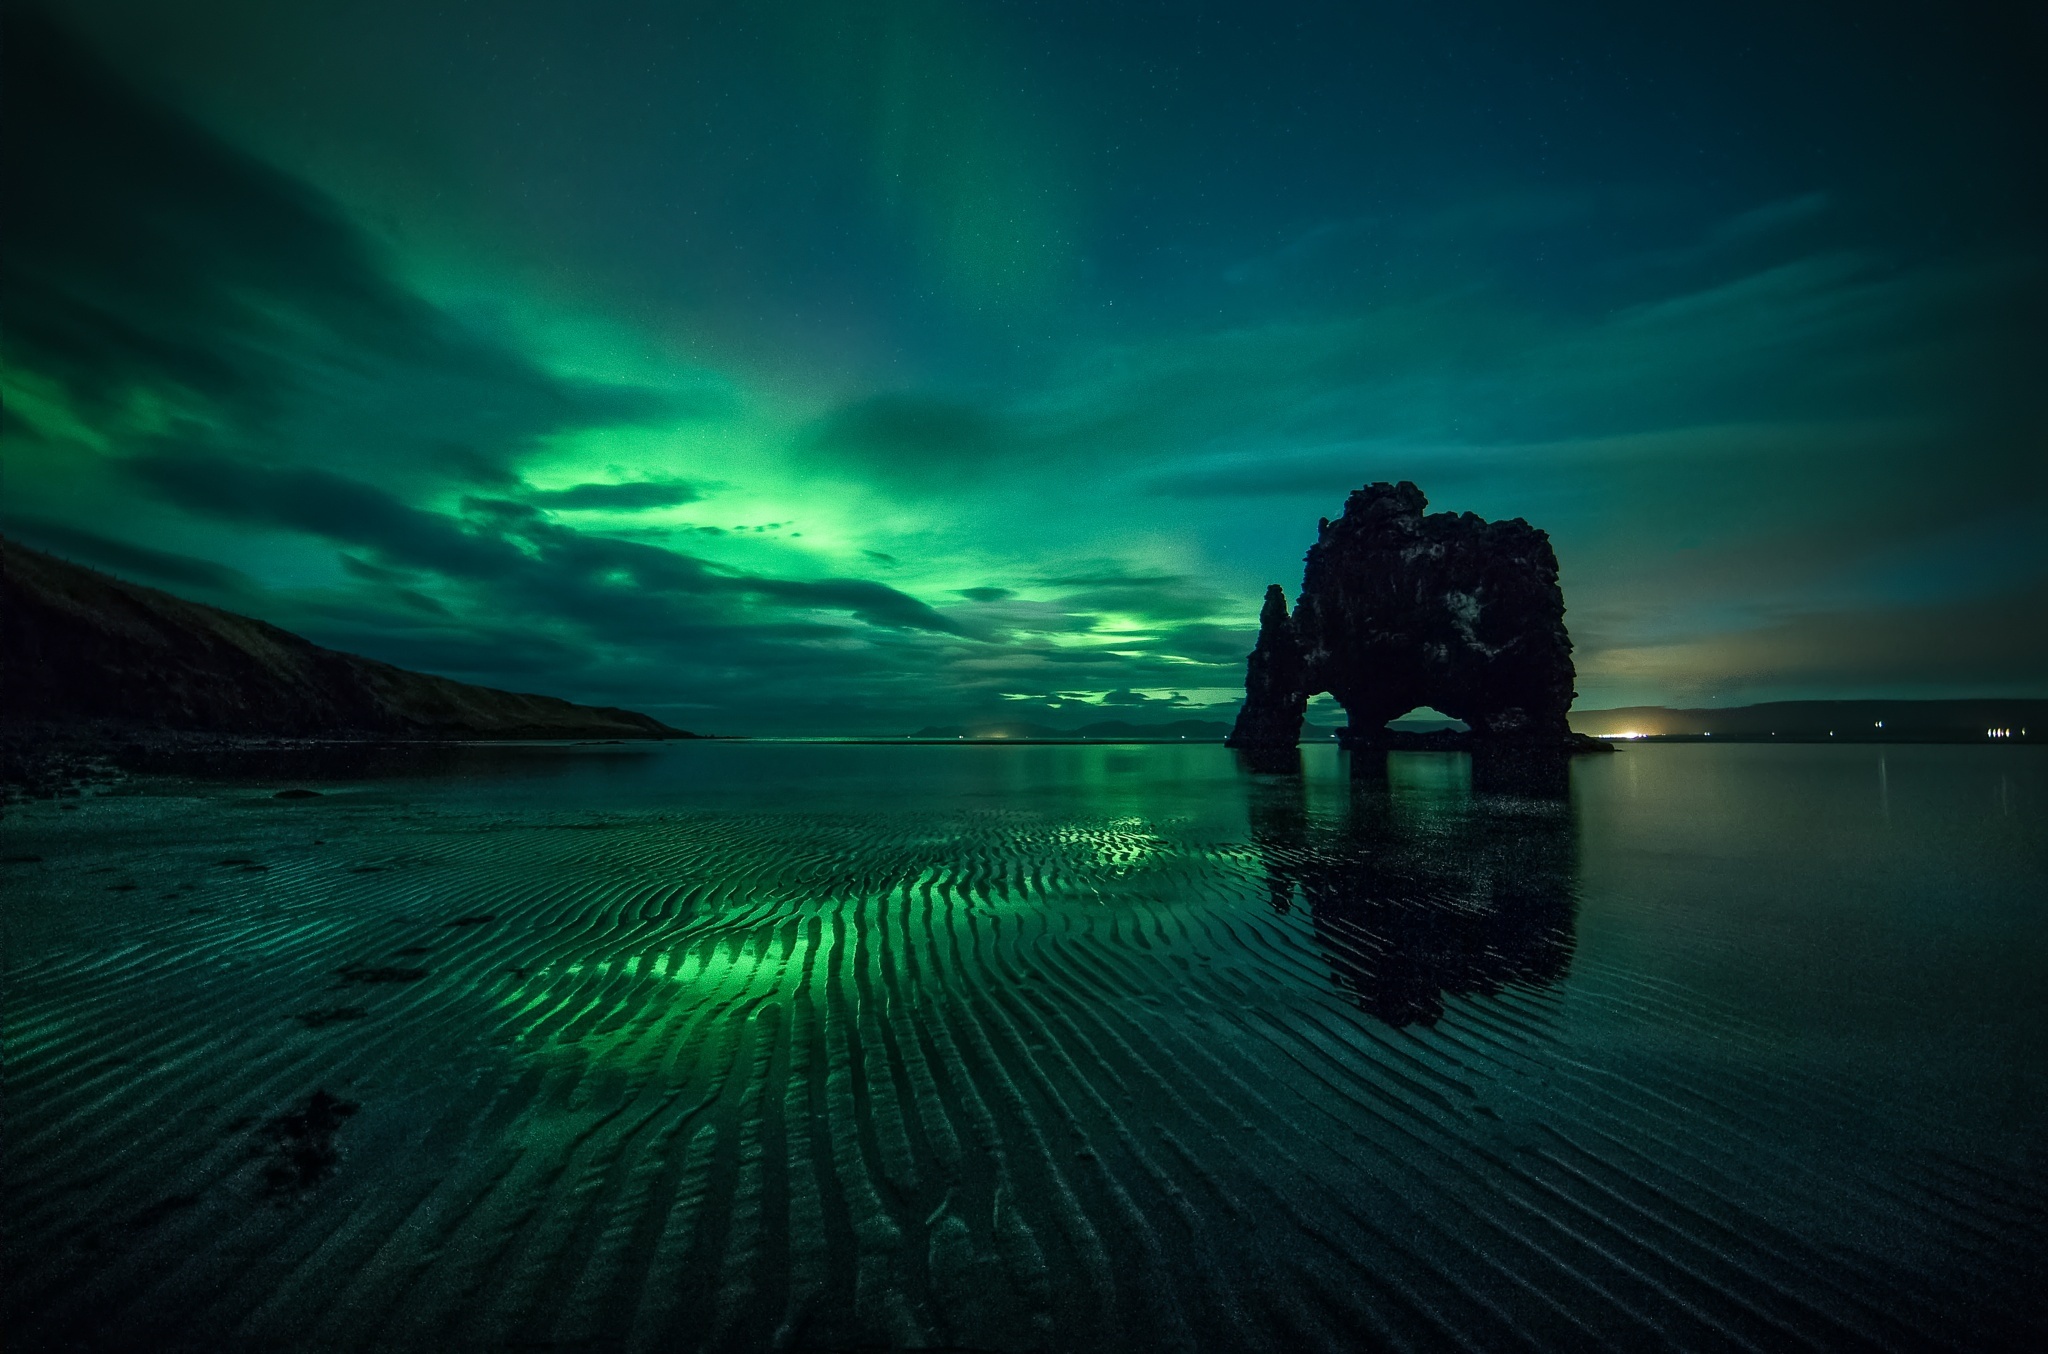 General 2048x1354 green reflection sky Hvítserkur turquoise night 500px nordic landscapes Iceland rock formation nature outdoors aurorae low light